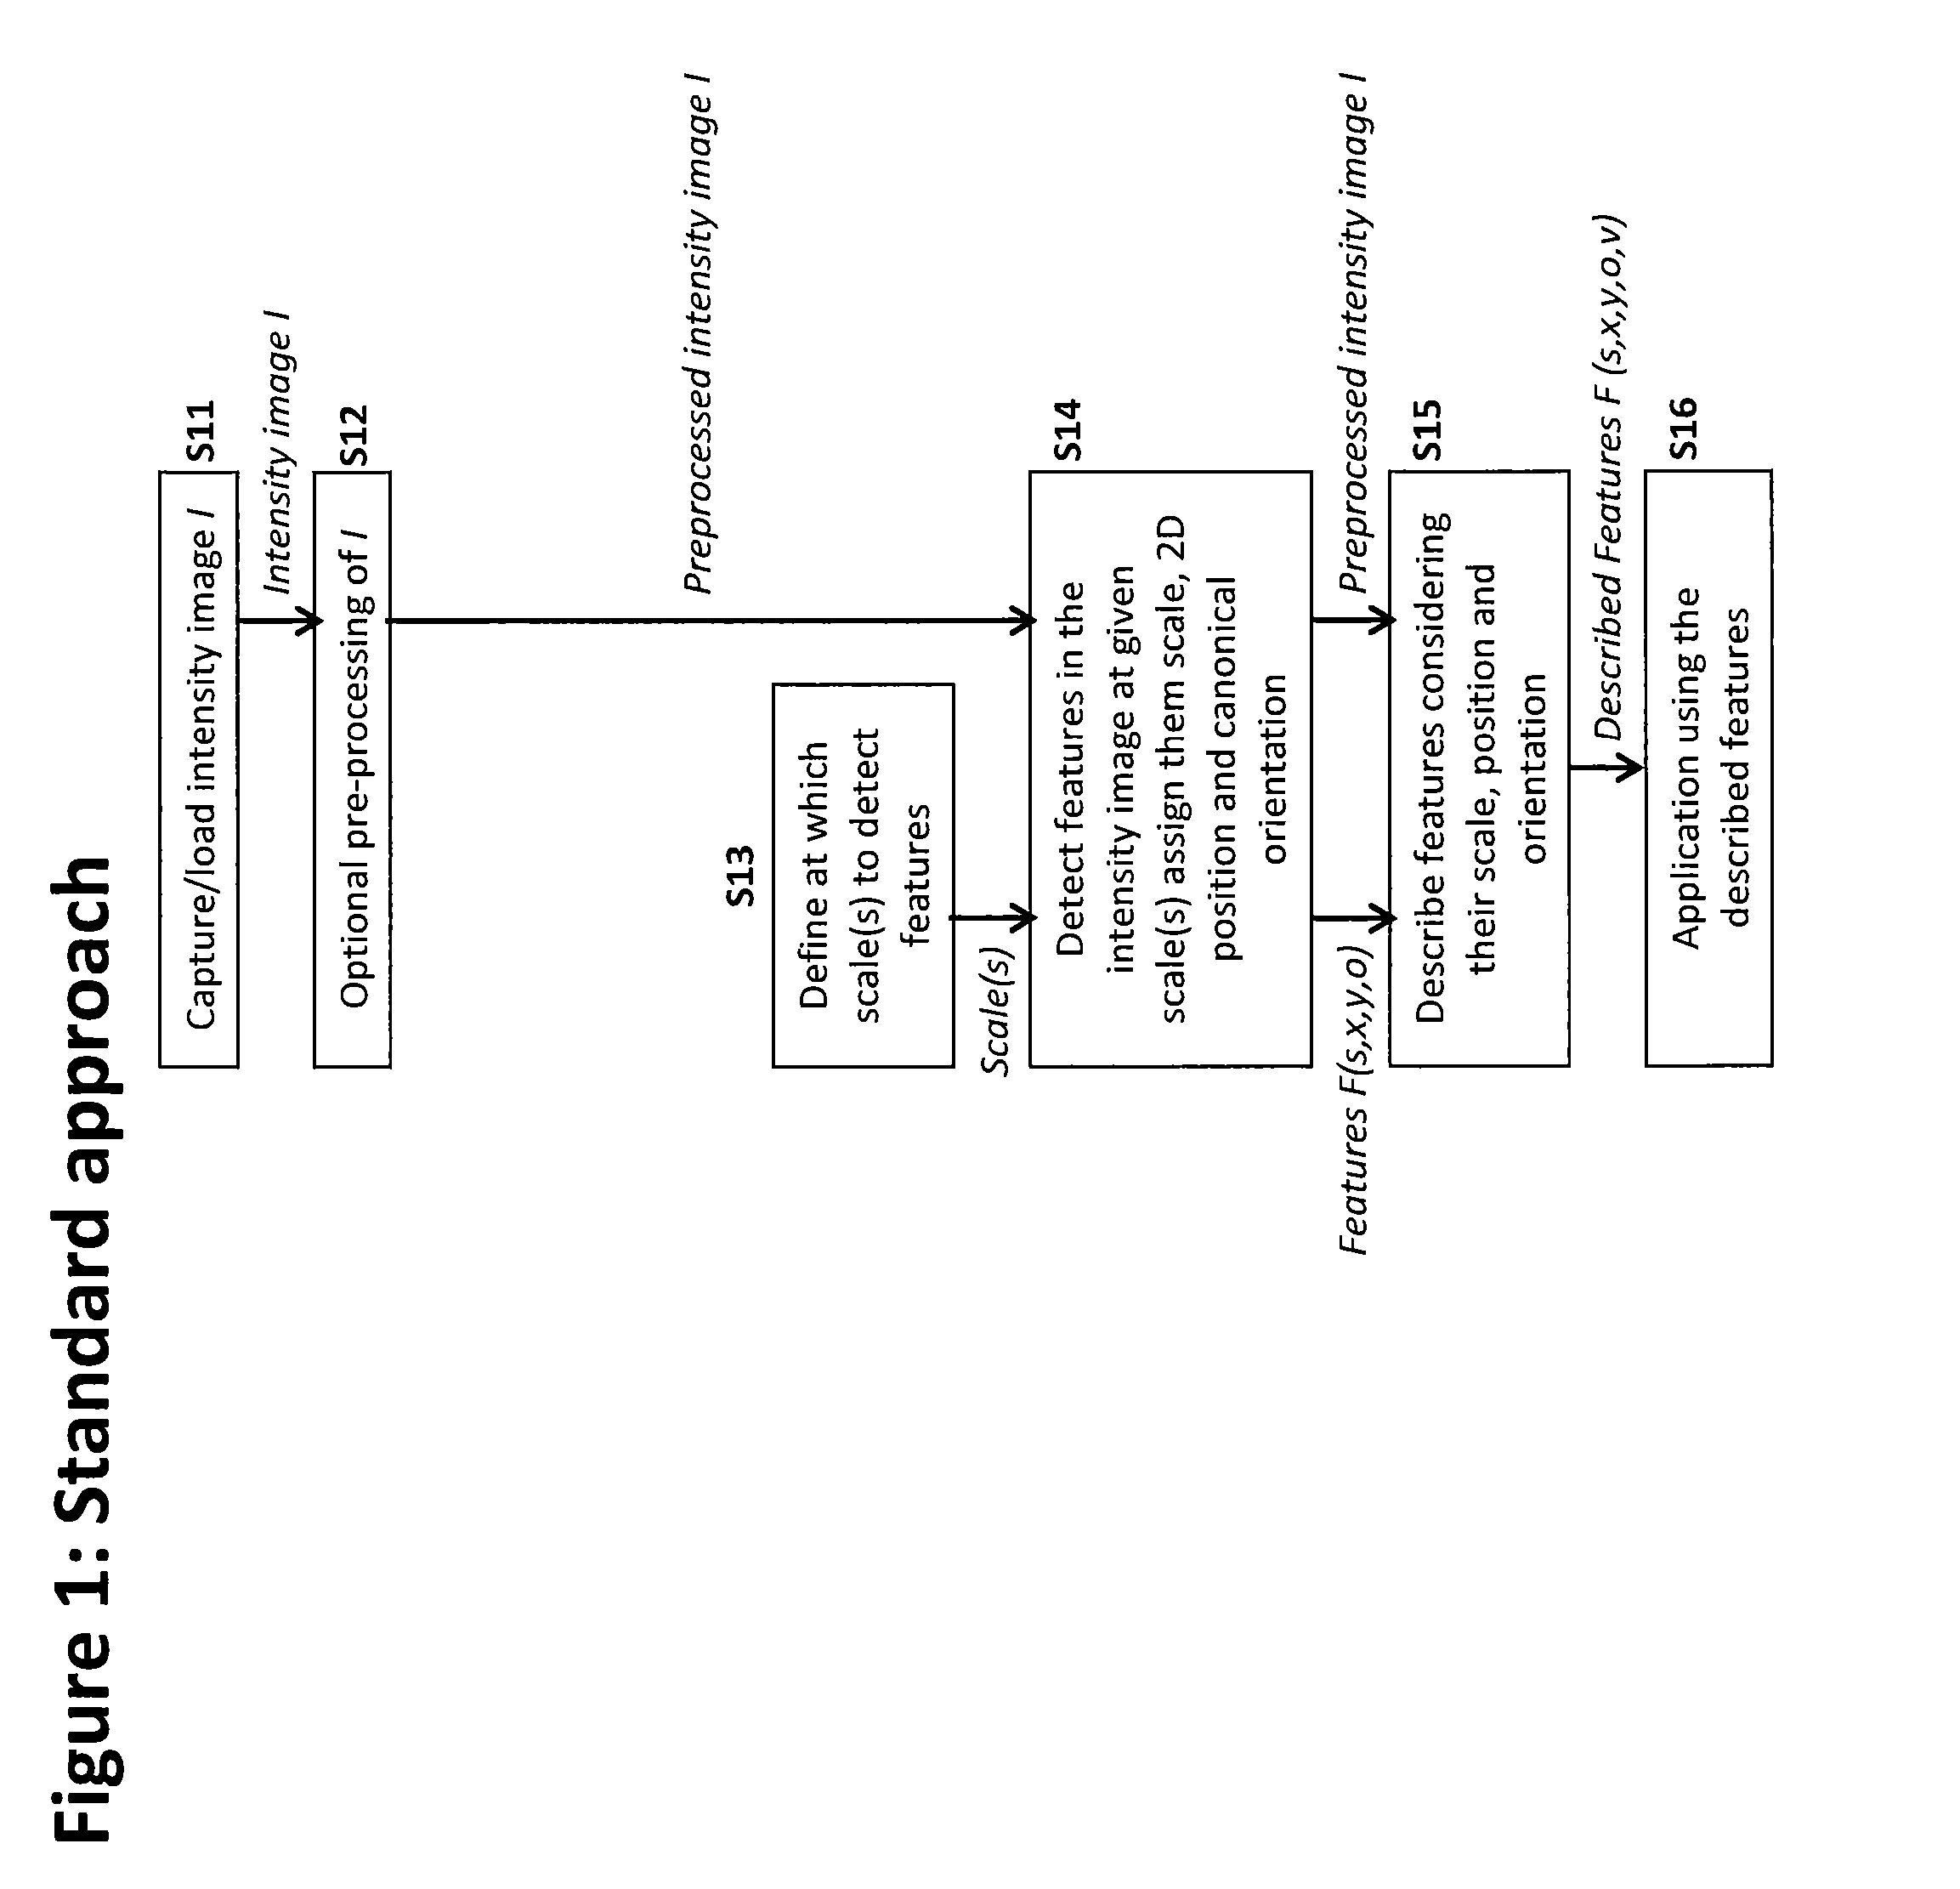 Method of detecting and describing features from an intensity image